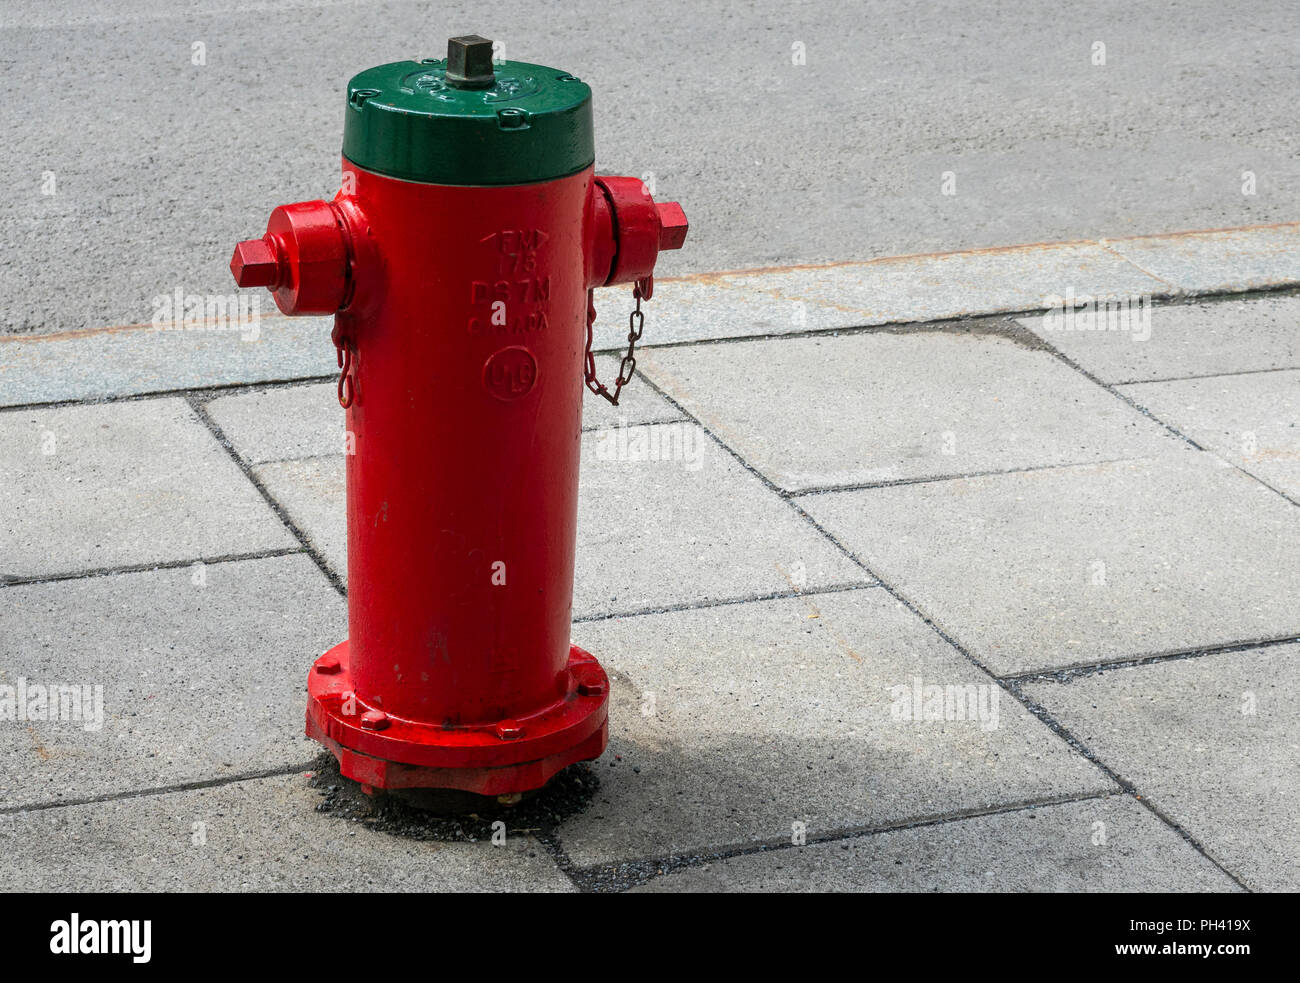 Red and green fire hydrant in Montreal, QC, Canada Stock Photo